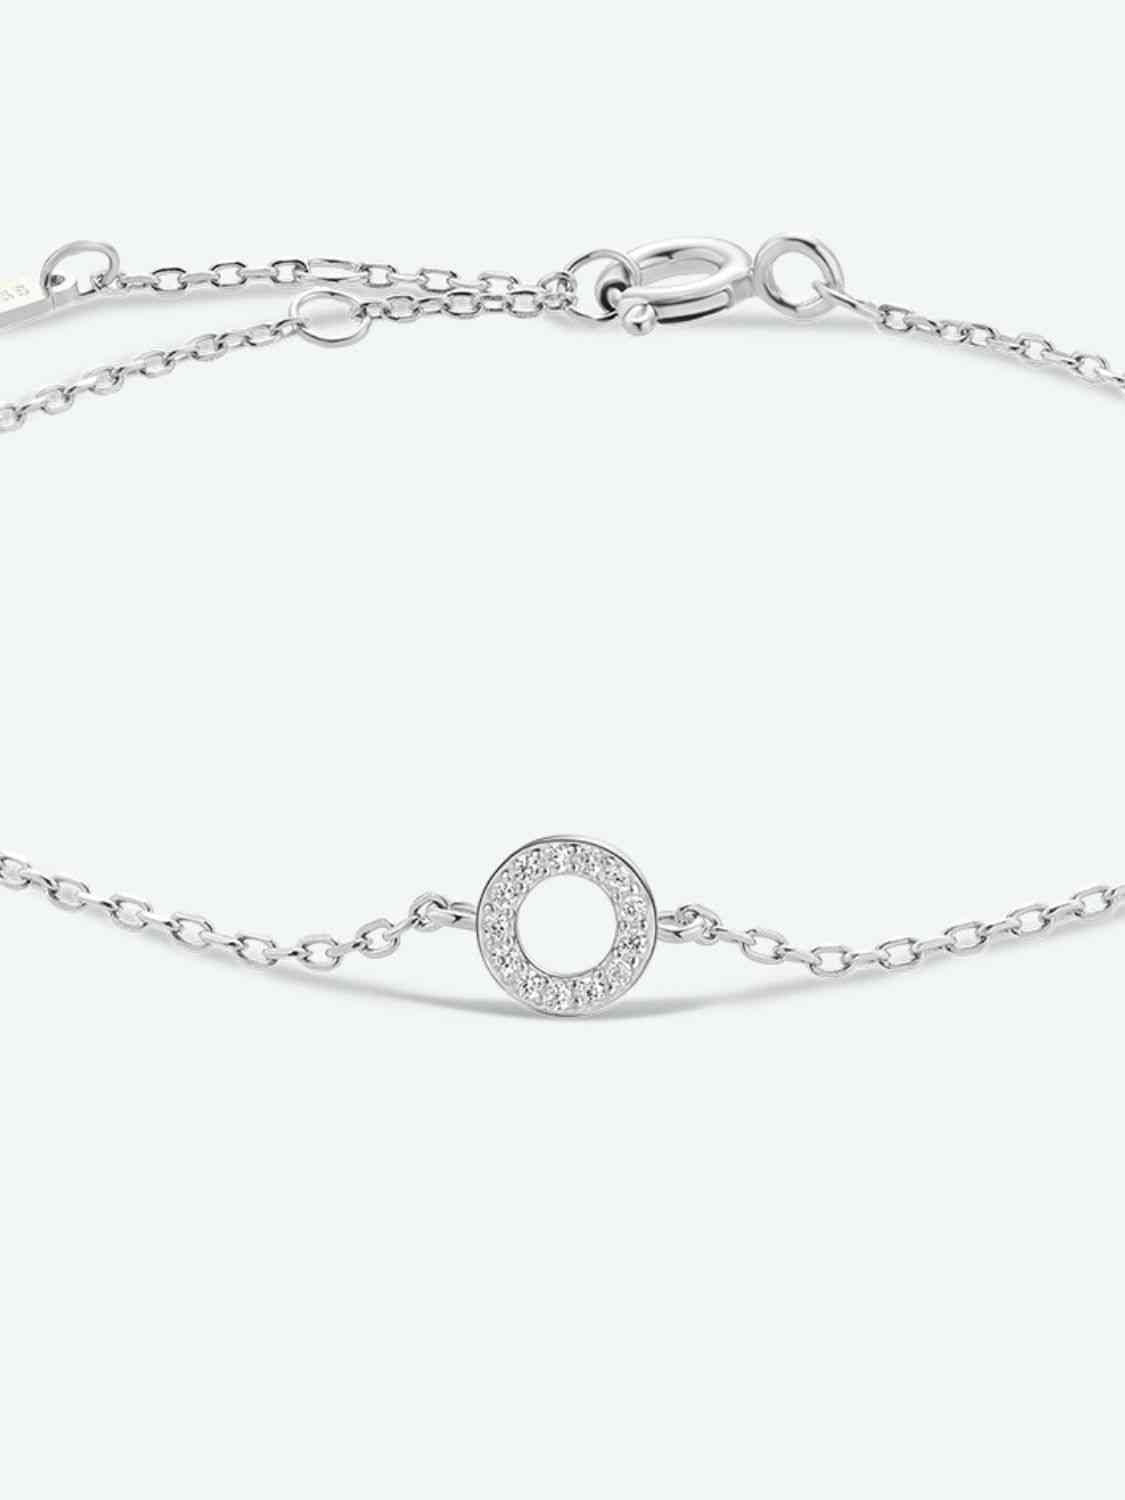 L To P Silver Bracelet with Zircon Accents